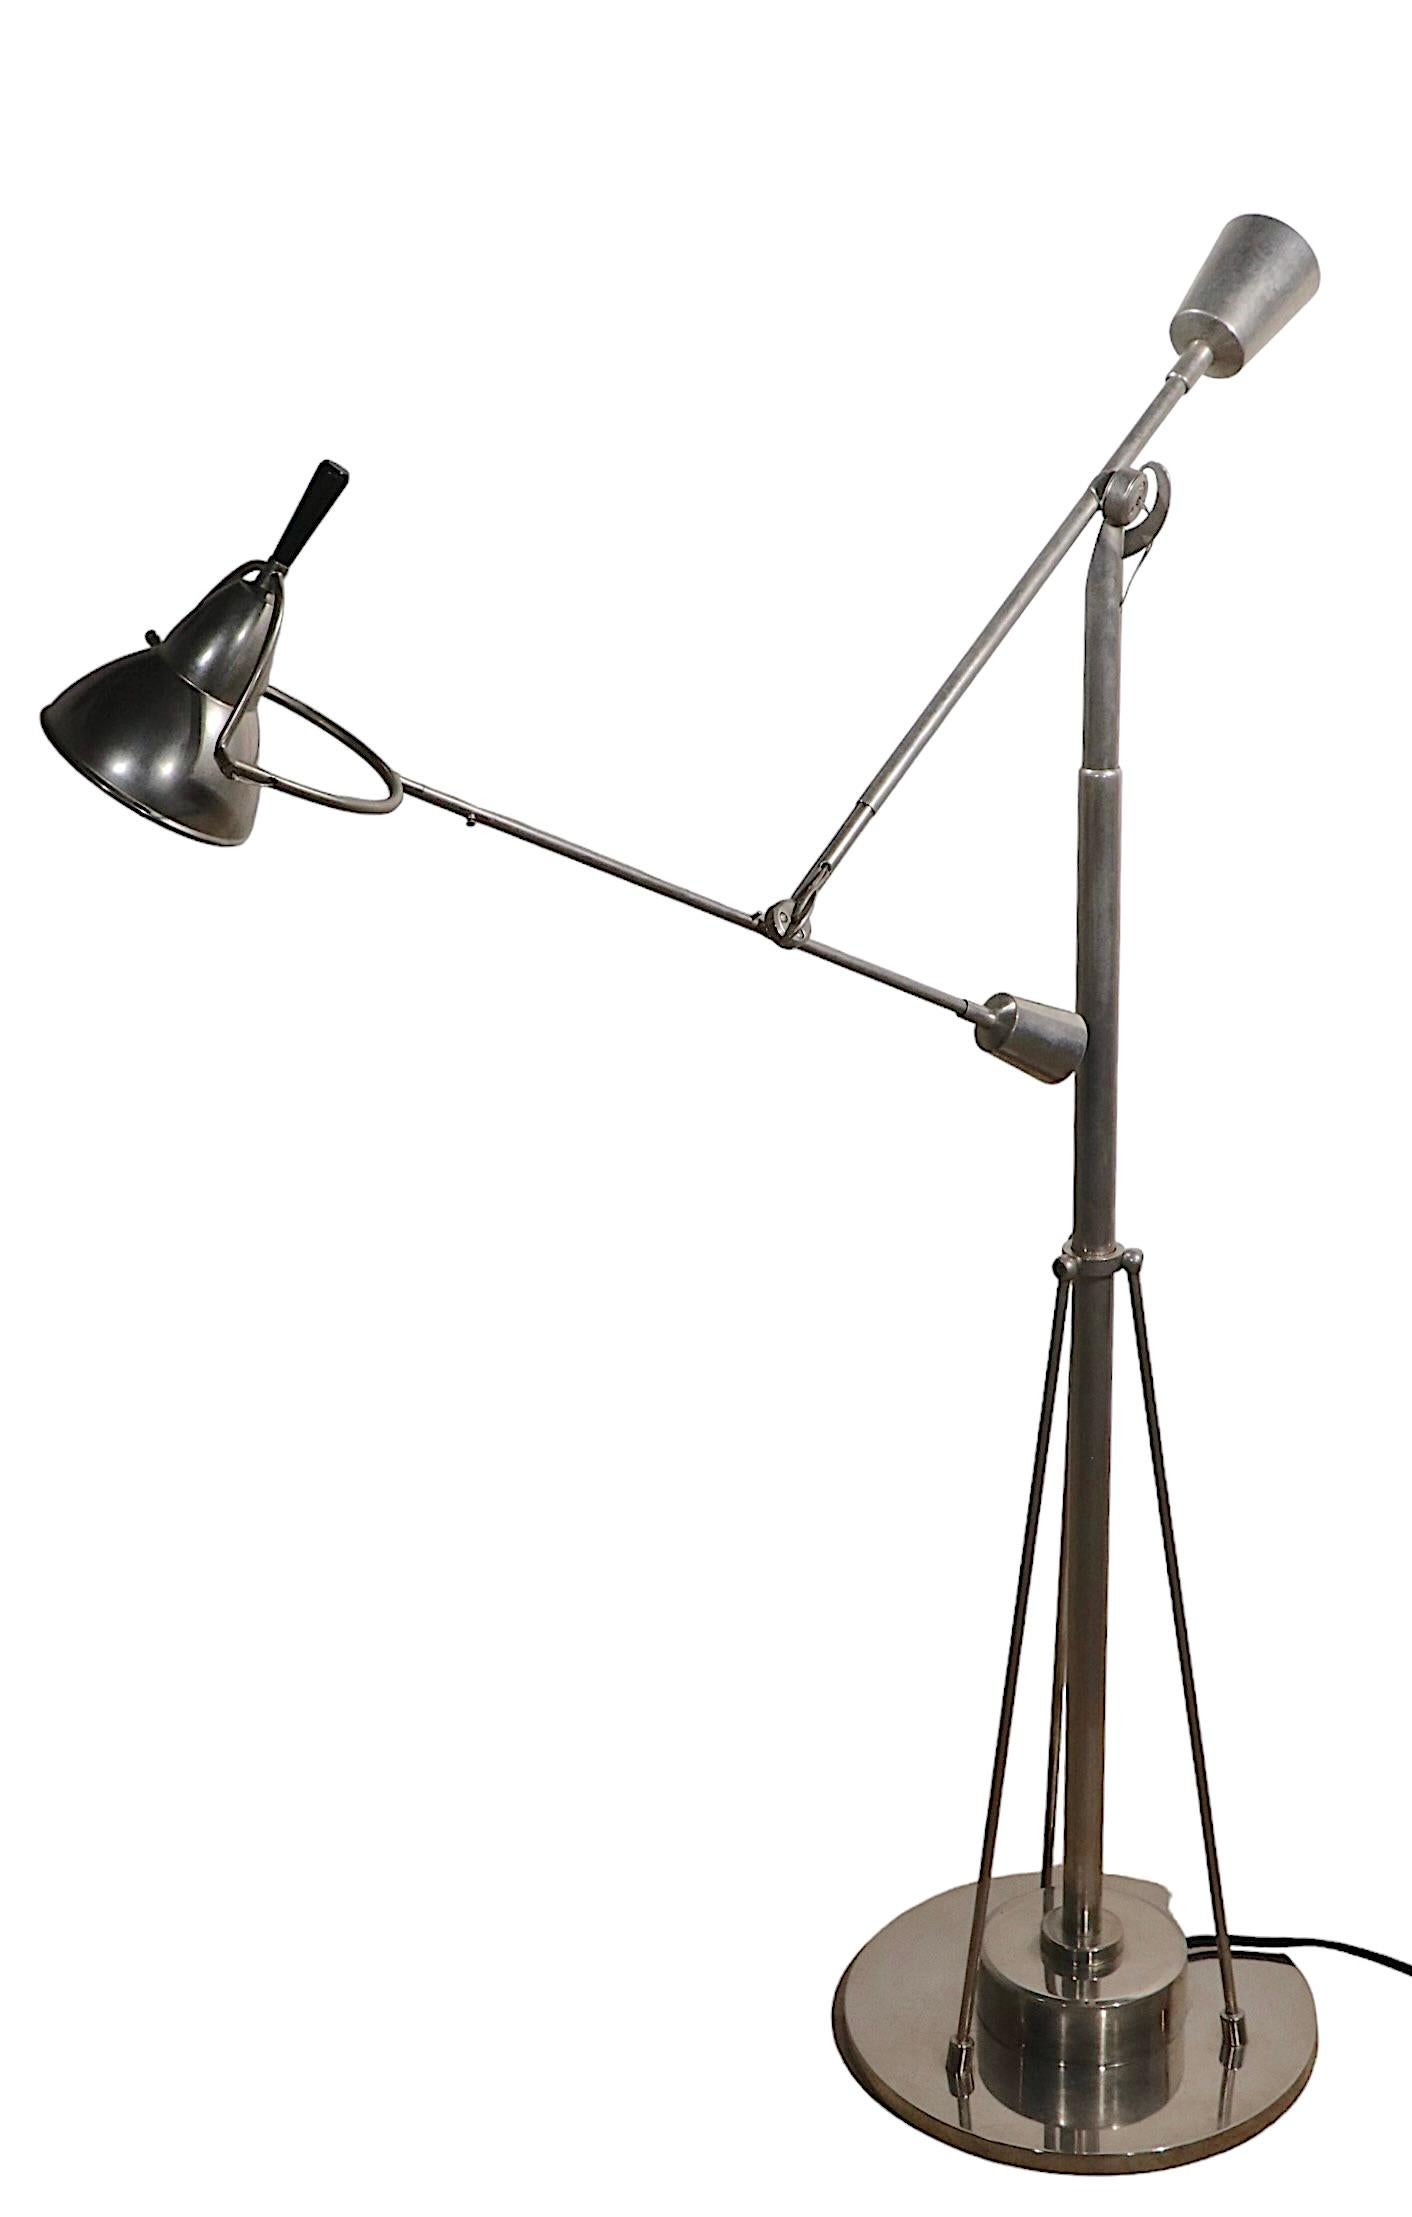 Well crafted replica of the iconic angle poise lamp originally designed in France in t the 1920's by Edouard - Wilfred Buquet, this is a high quality later reproduction. The lamp features two articulating joints which allow positioning of the light,